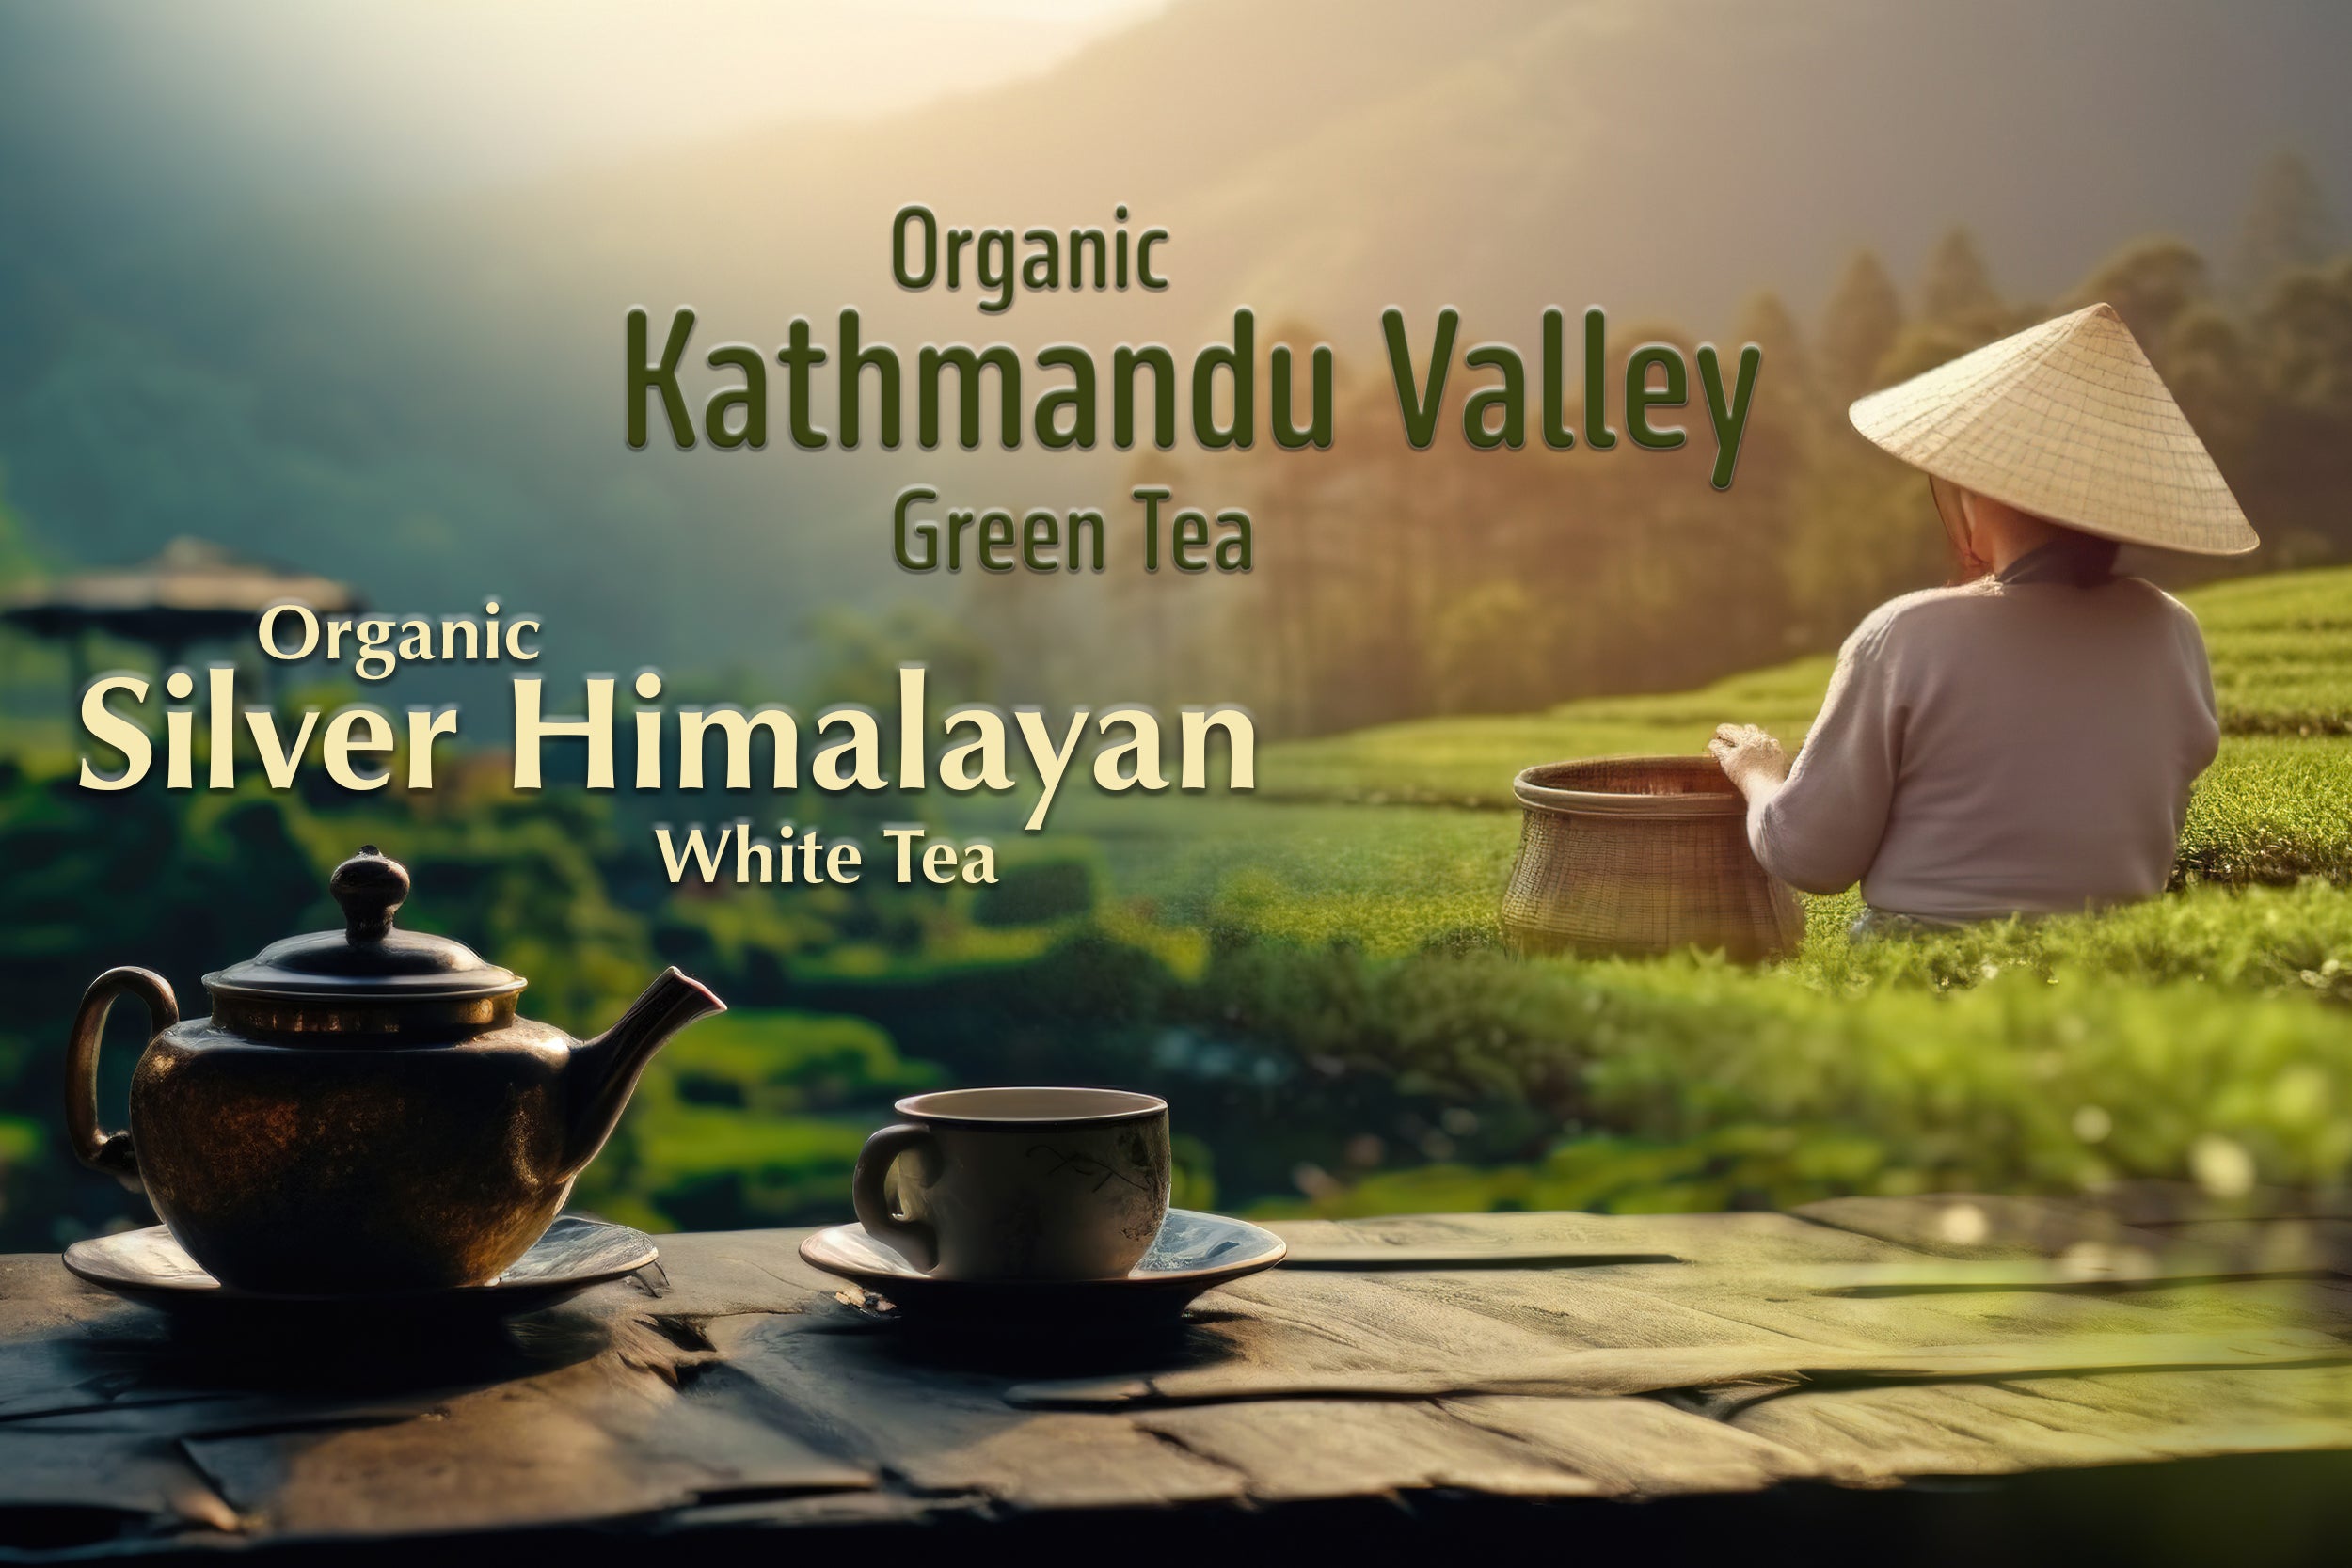 Two New Organic Teas From Nepal